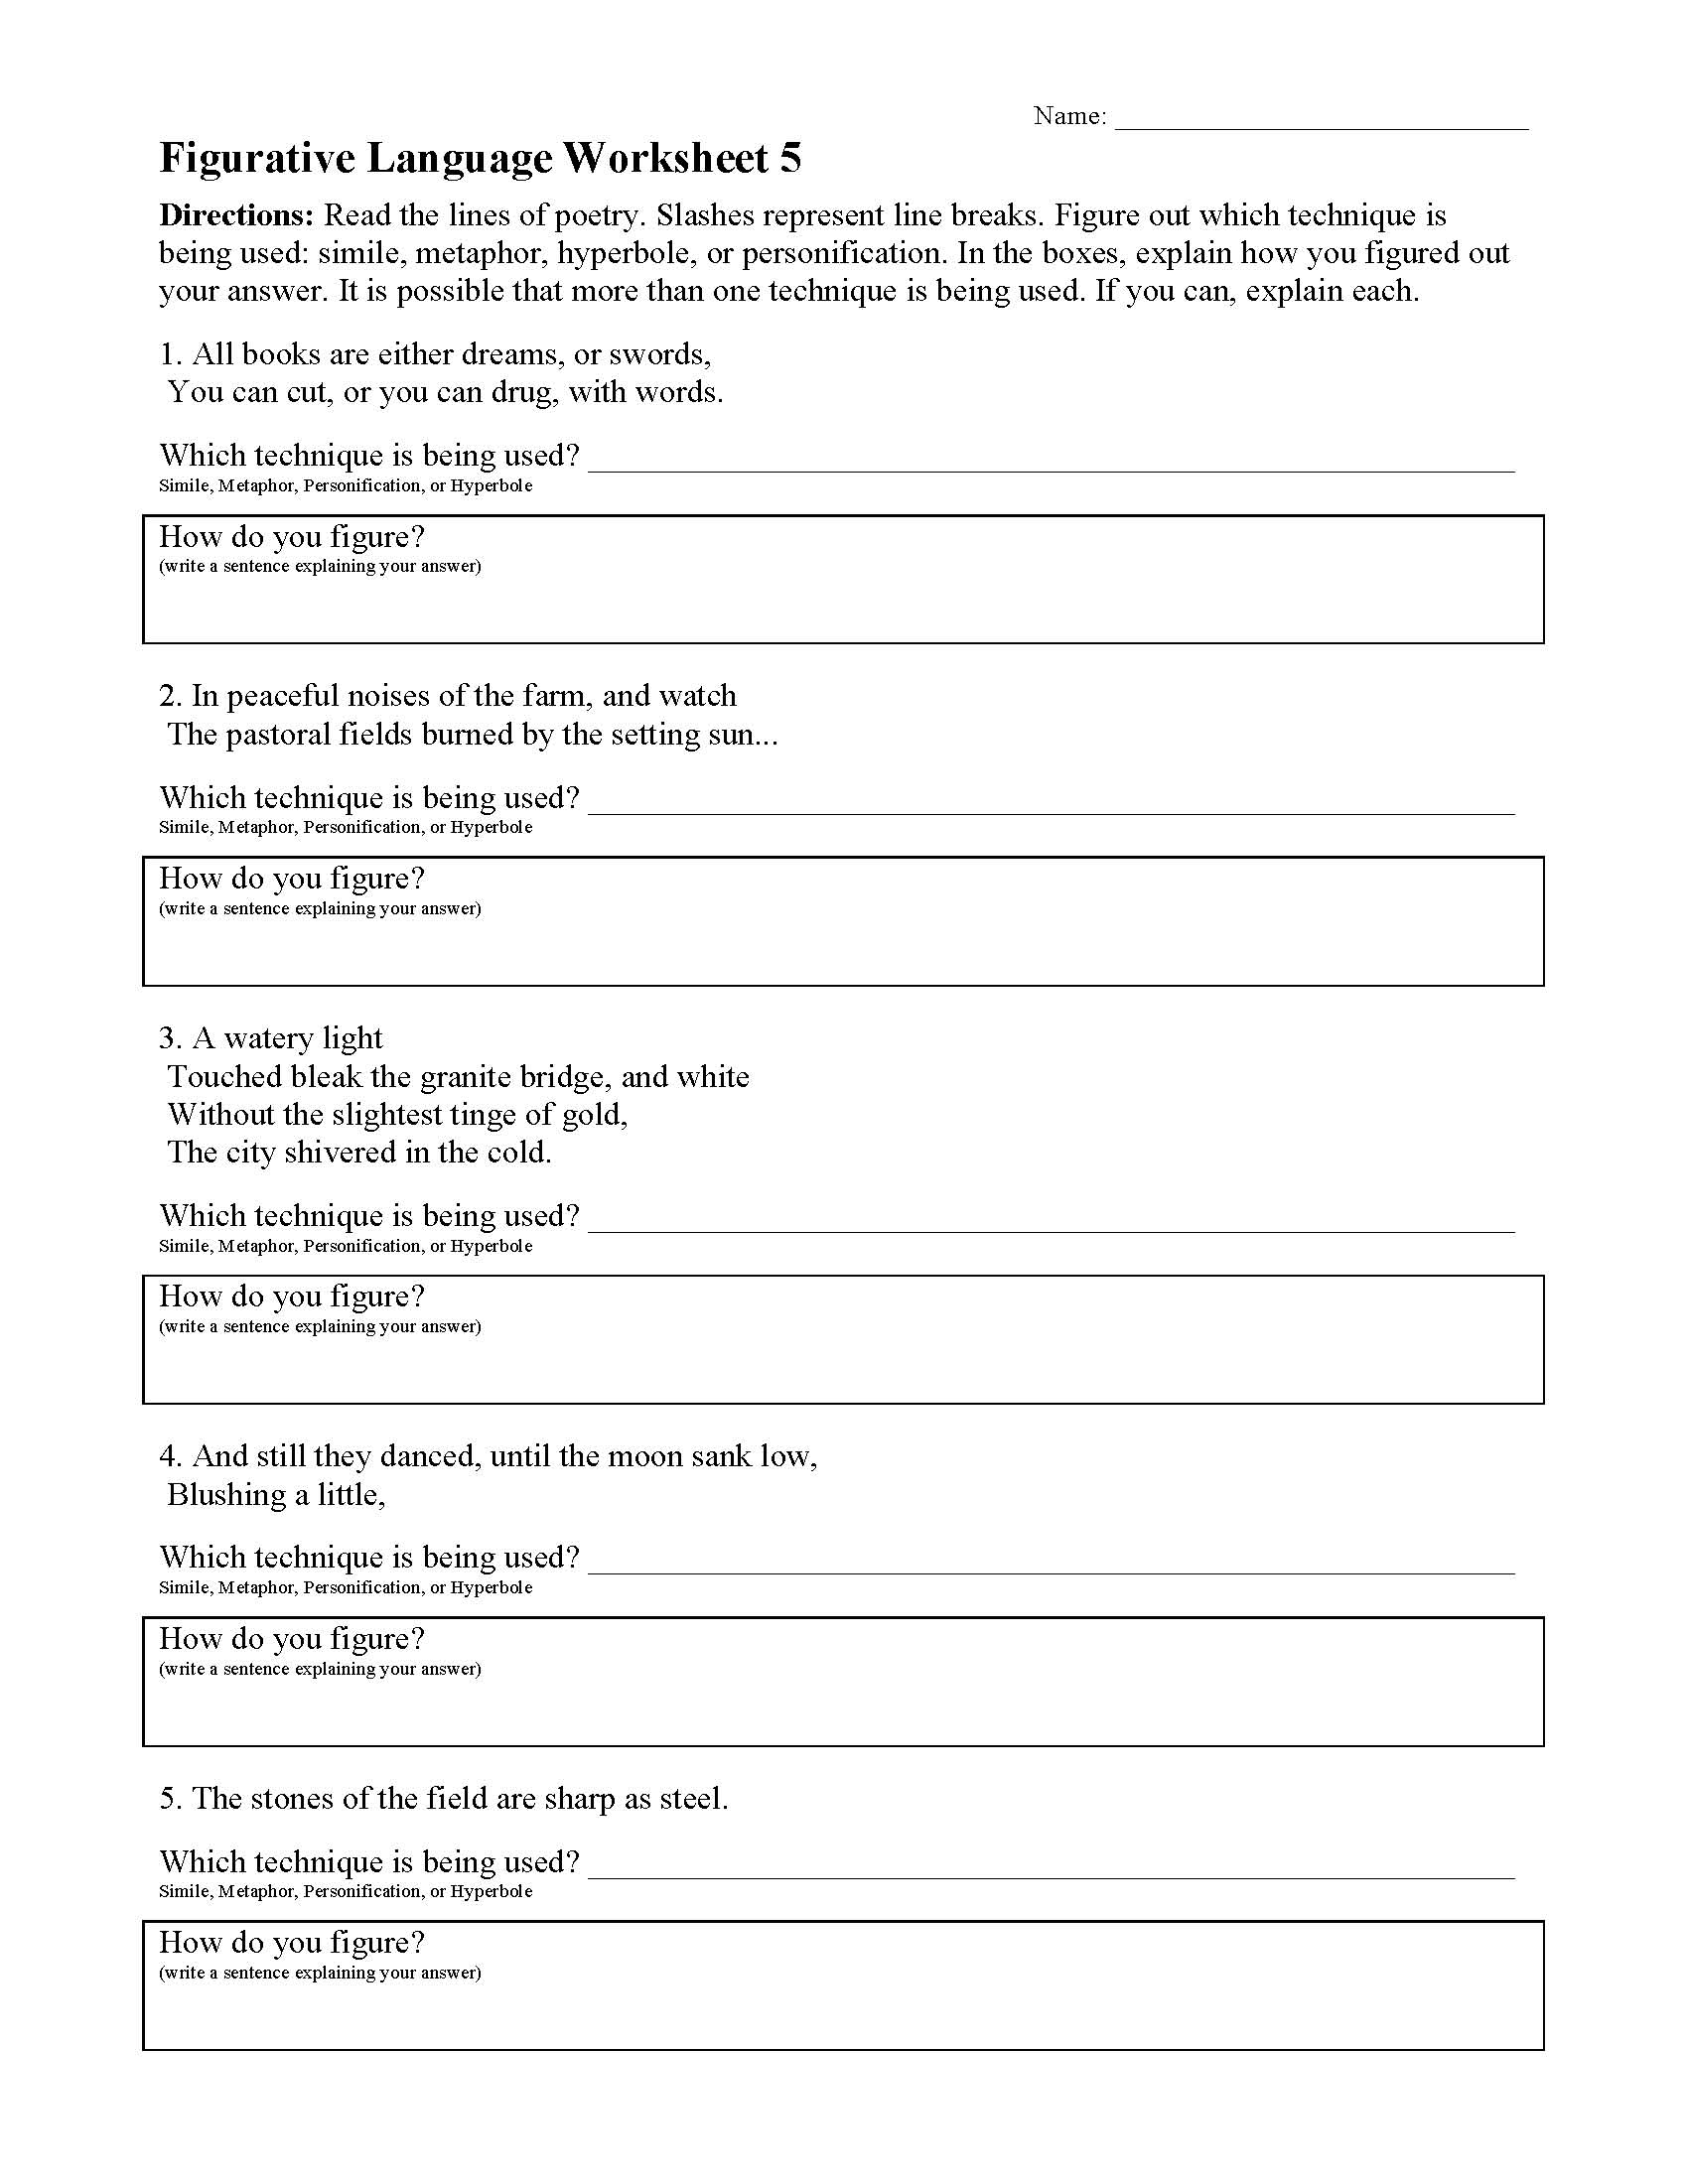 This is a preview image of Figurative Language Worksheet 5. Click on it to enlarge it or view the source file.